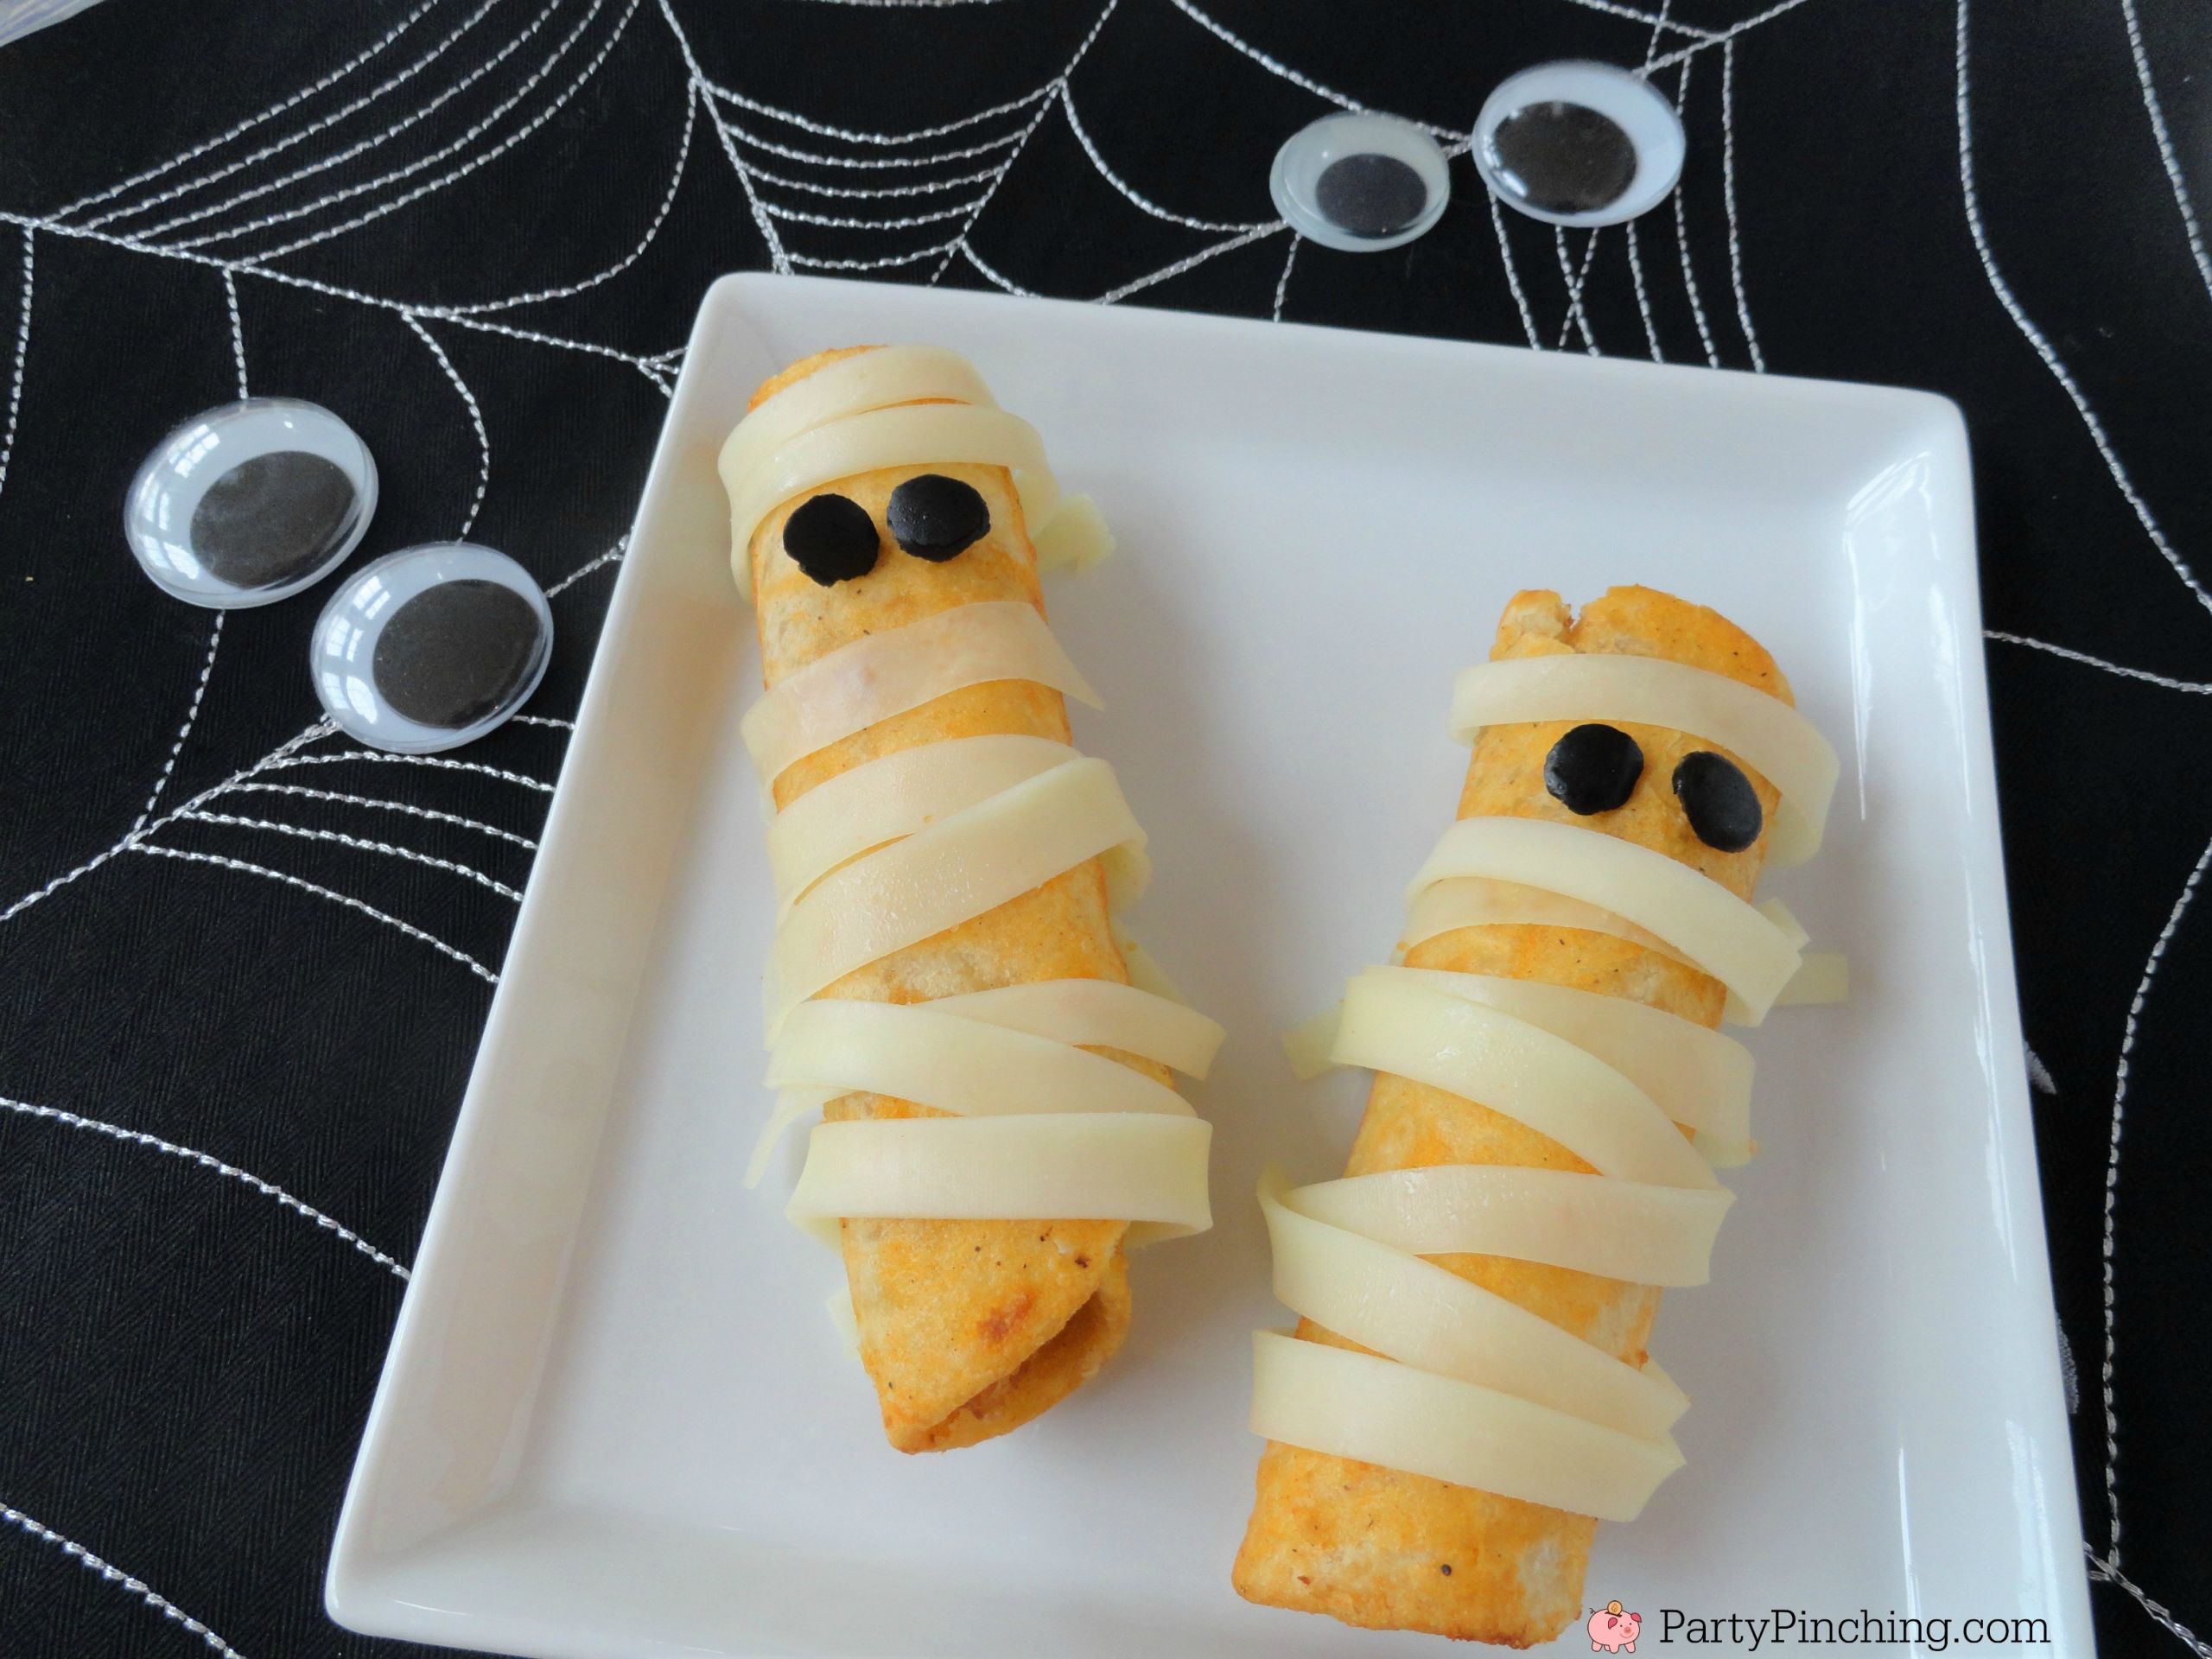 Cute Halloween Food Ideas For Party
 mummy Halloween appetizers fun Halloween kids party food